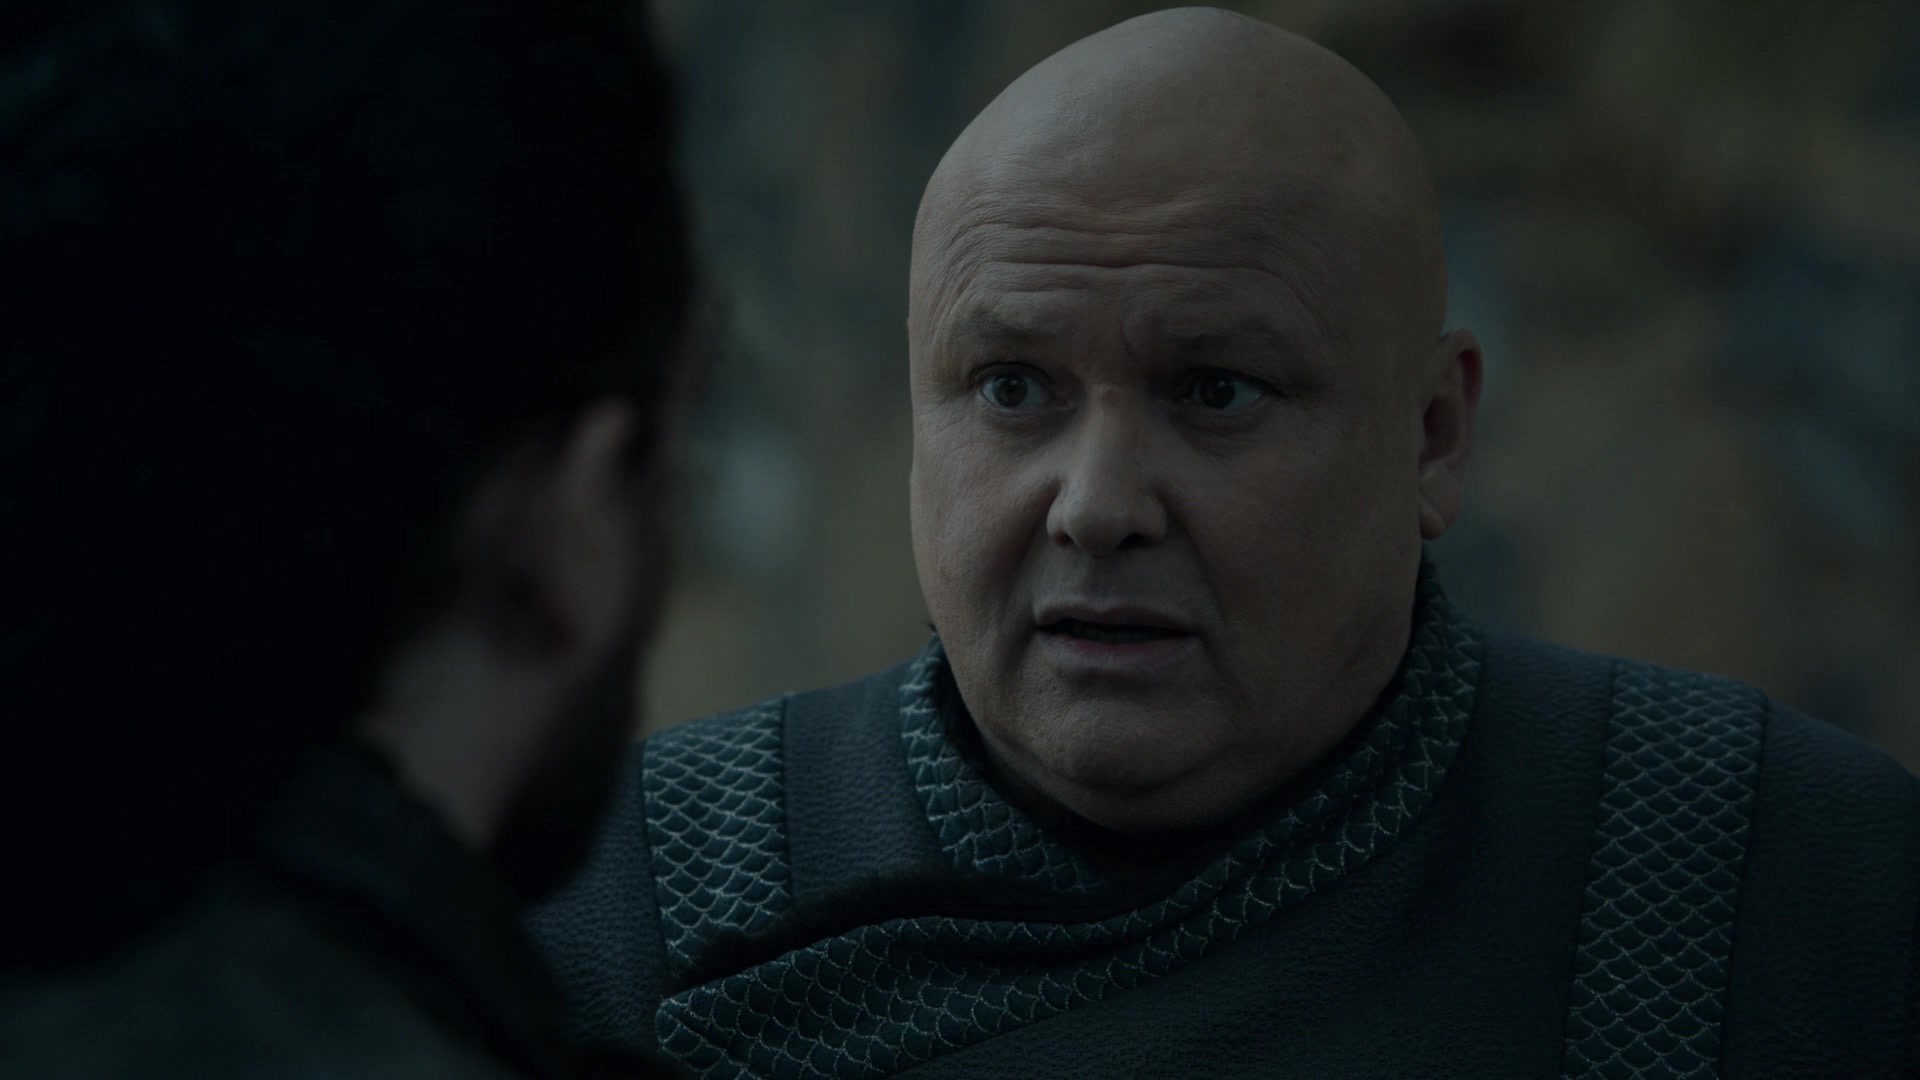 Varys (Conleth Hill) offers guidance to Jon Snow (Kit Harrington) in Game of Thrones Season 8 Episode 5 “The Bells” (2019), HBO